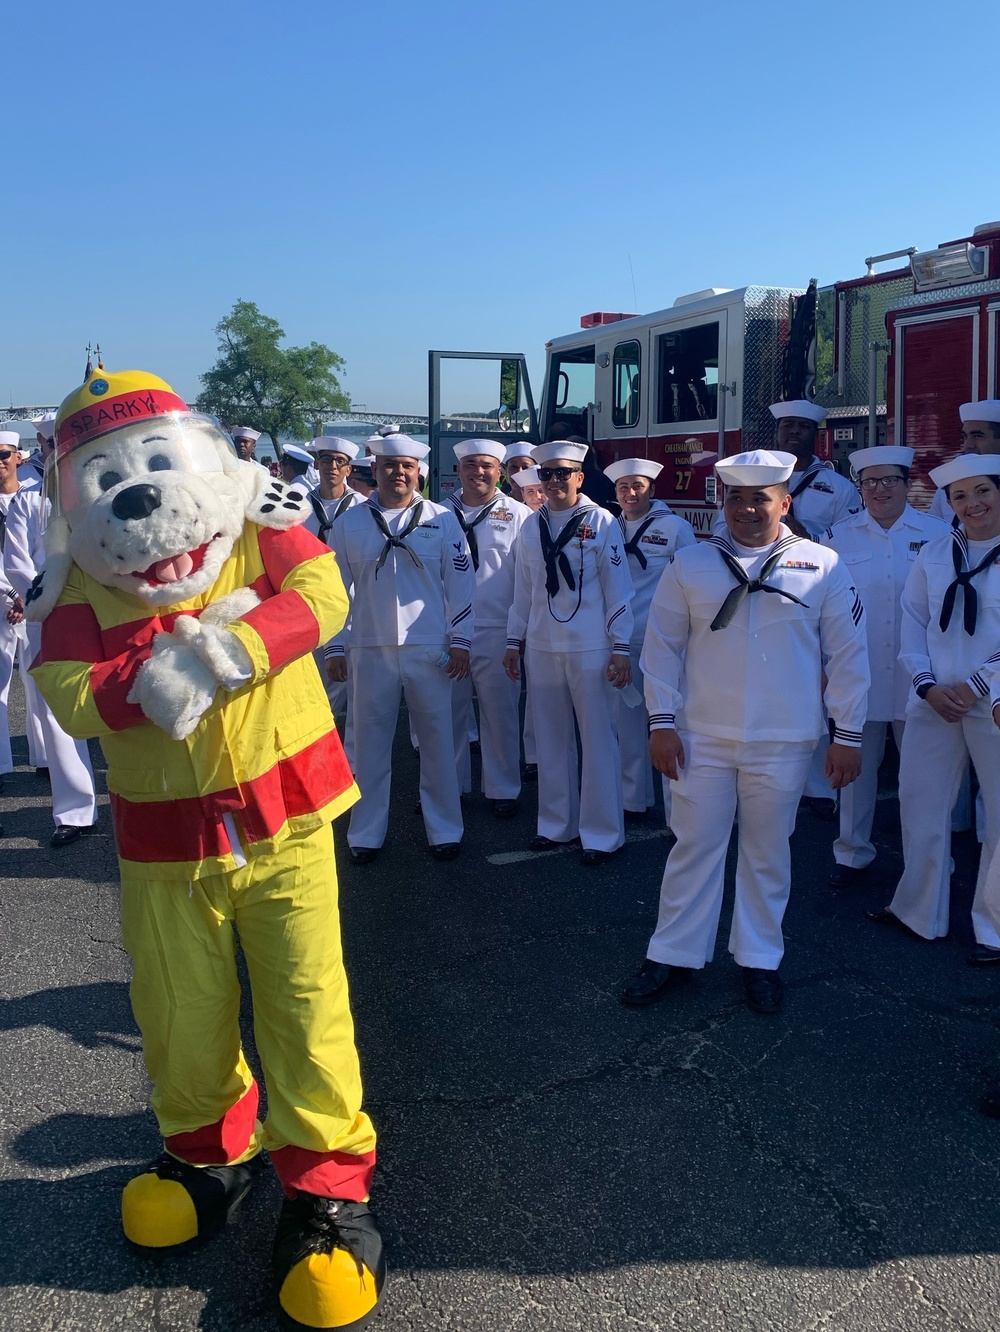 DVIDS Images NWS Yorktown Sailors and Sparky are ready for the 4th